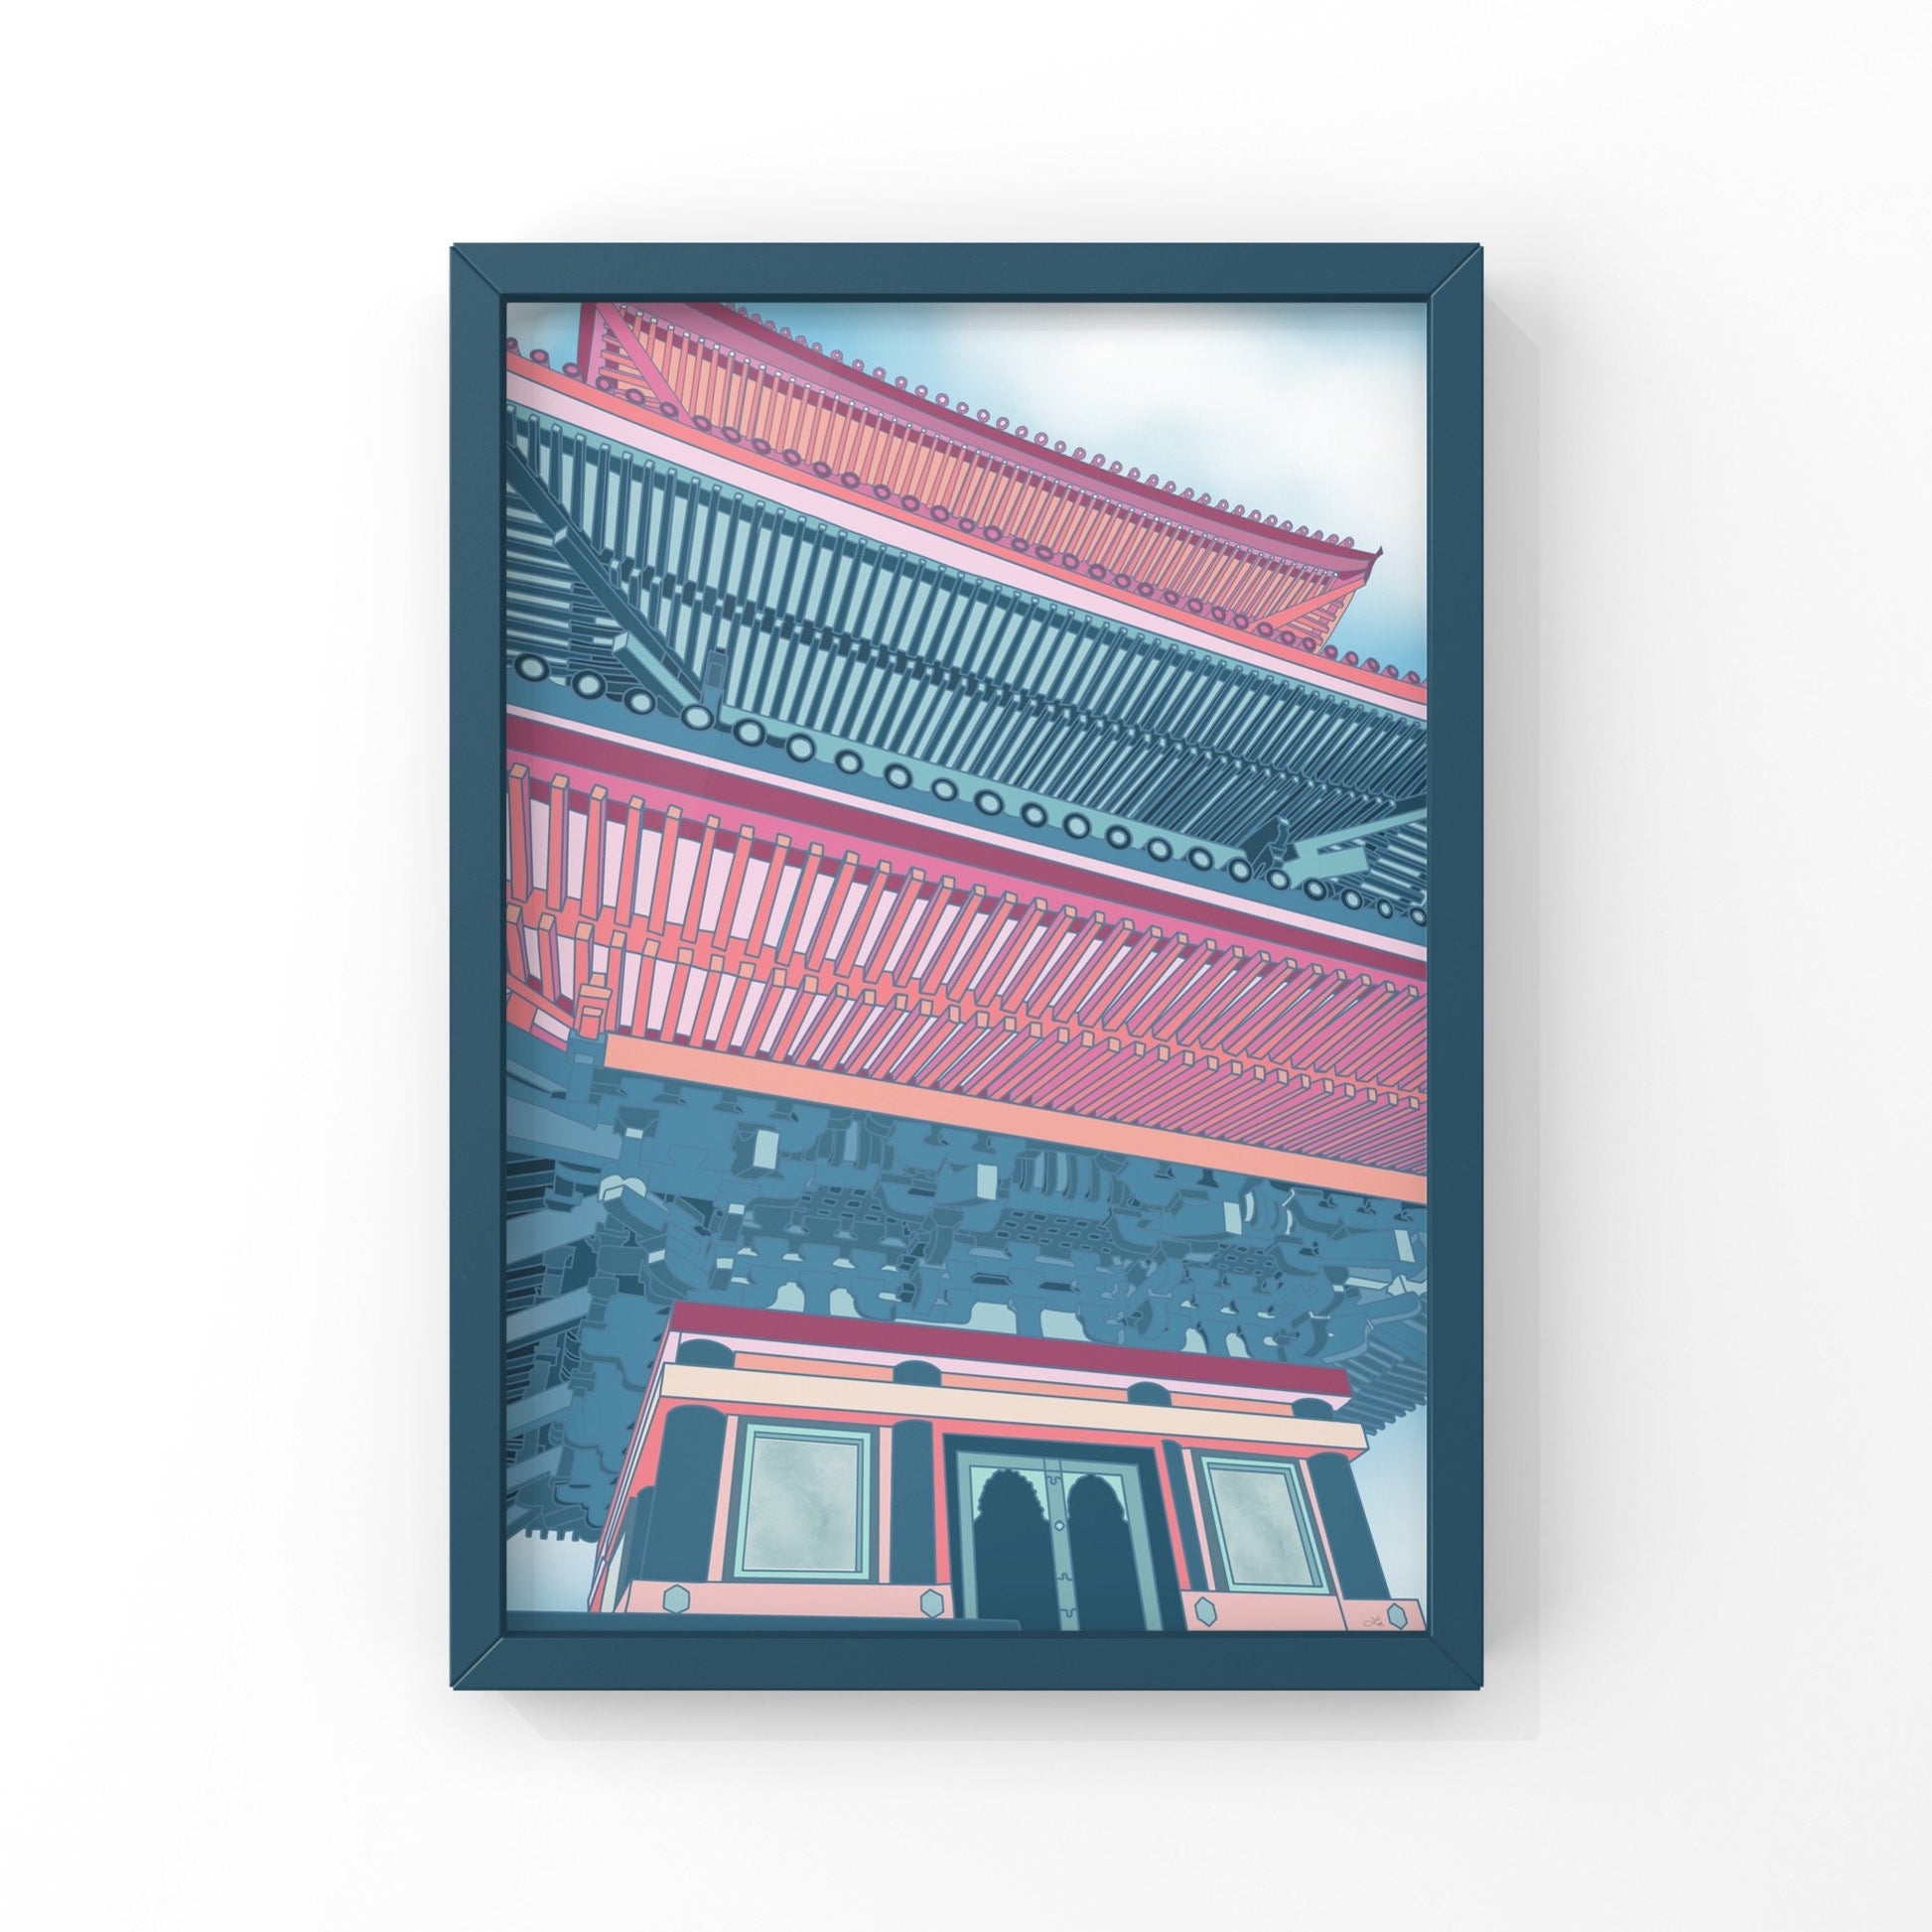 Japanese temple - This Pagoda is drawn in cheerful shades of pink and blue, would be the perfect art piece to spruce up those bare walls!